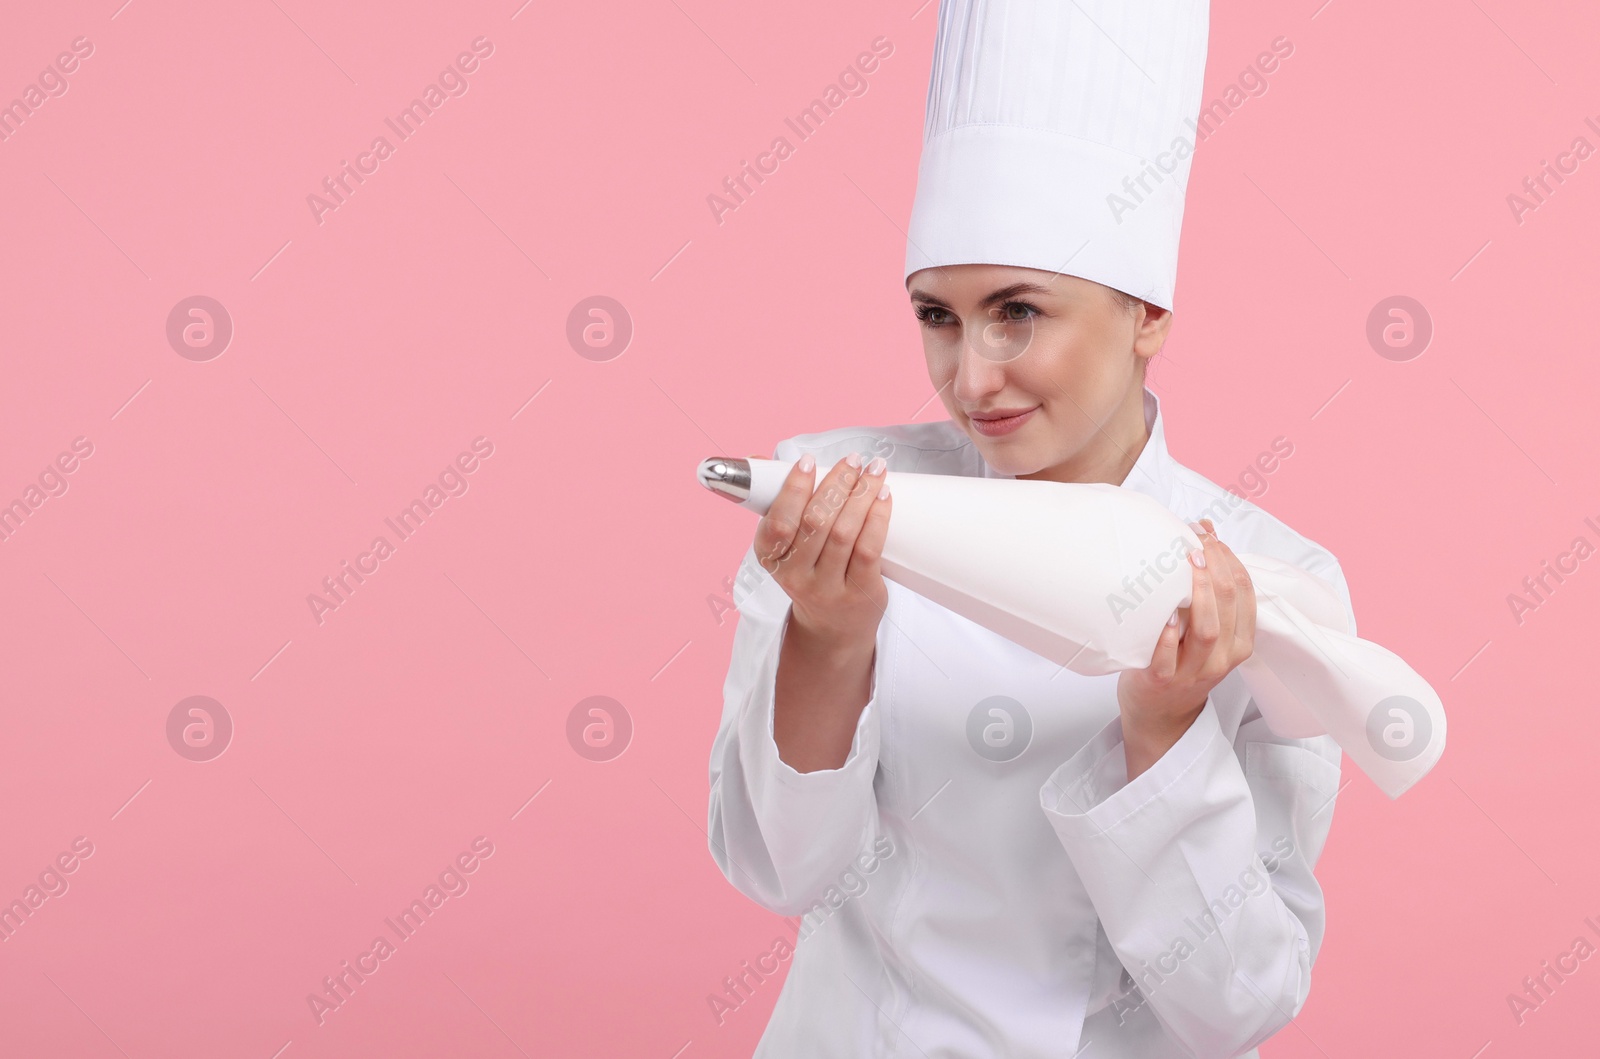 Photo of Professional confectioner in uniform holding piping bag on pink background. Space for text